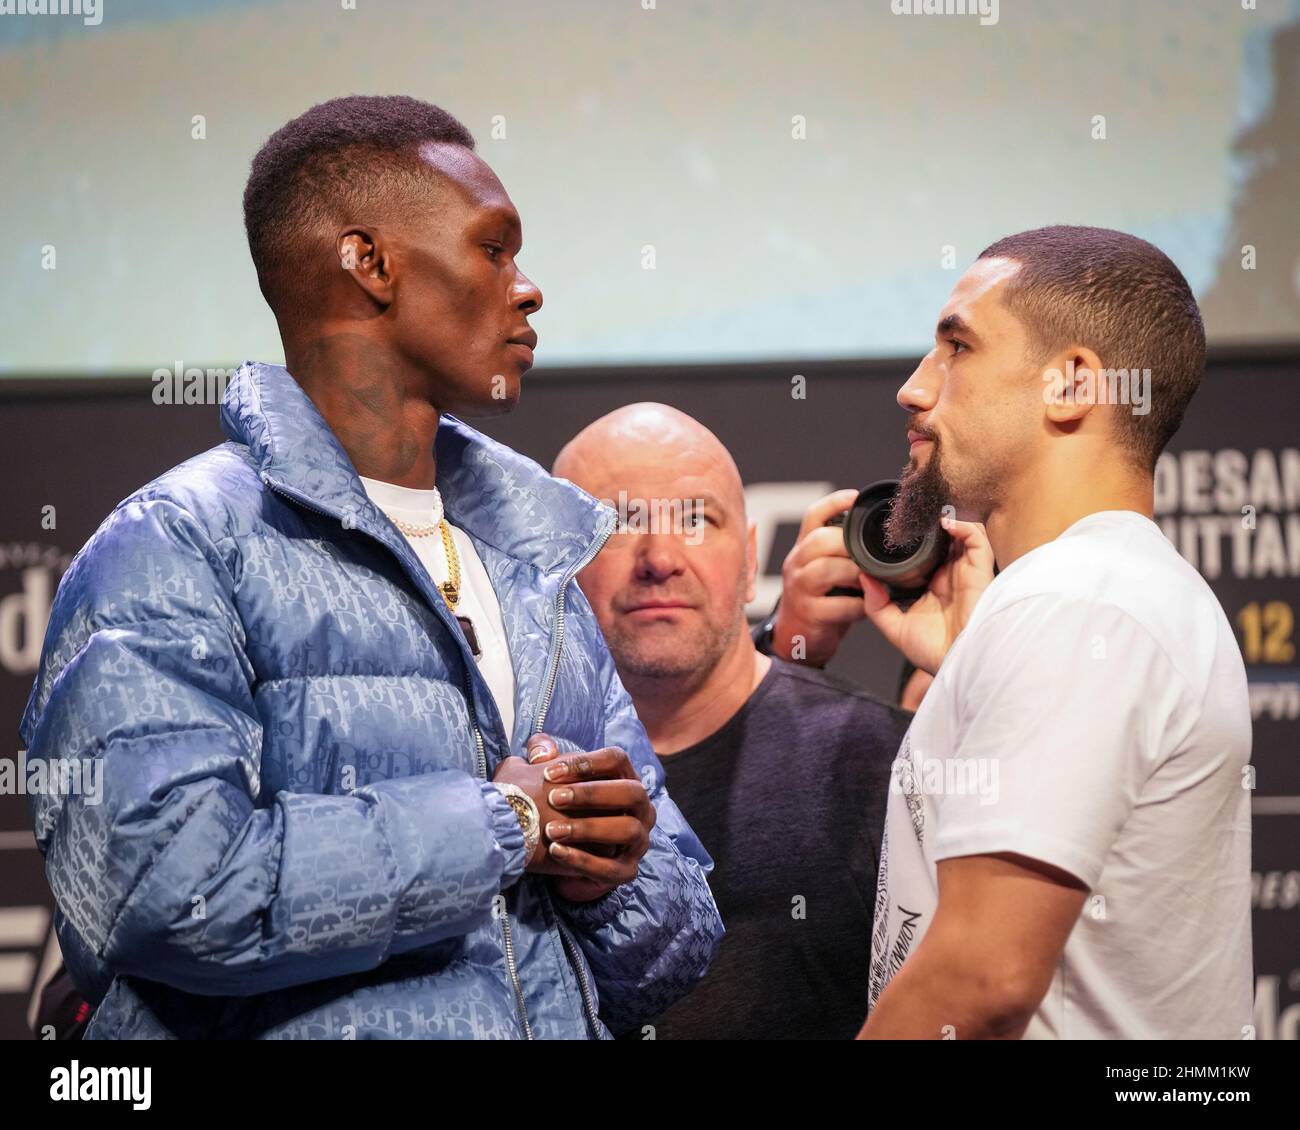 HOUSTON, TX - February 10: Israel Adesanya (L) and Robert Whittaker (R) face-off at Toyota Center for UFC 271: Adesanya vs. Whittaker 2 - Press Conference on February 10, 2022 in Houston, Texas, United States. (Photo by Louis Grasse/PxImages) Stock Photo